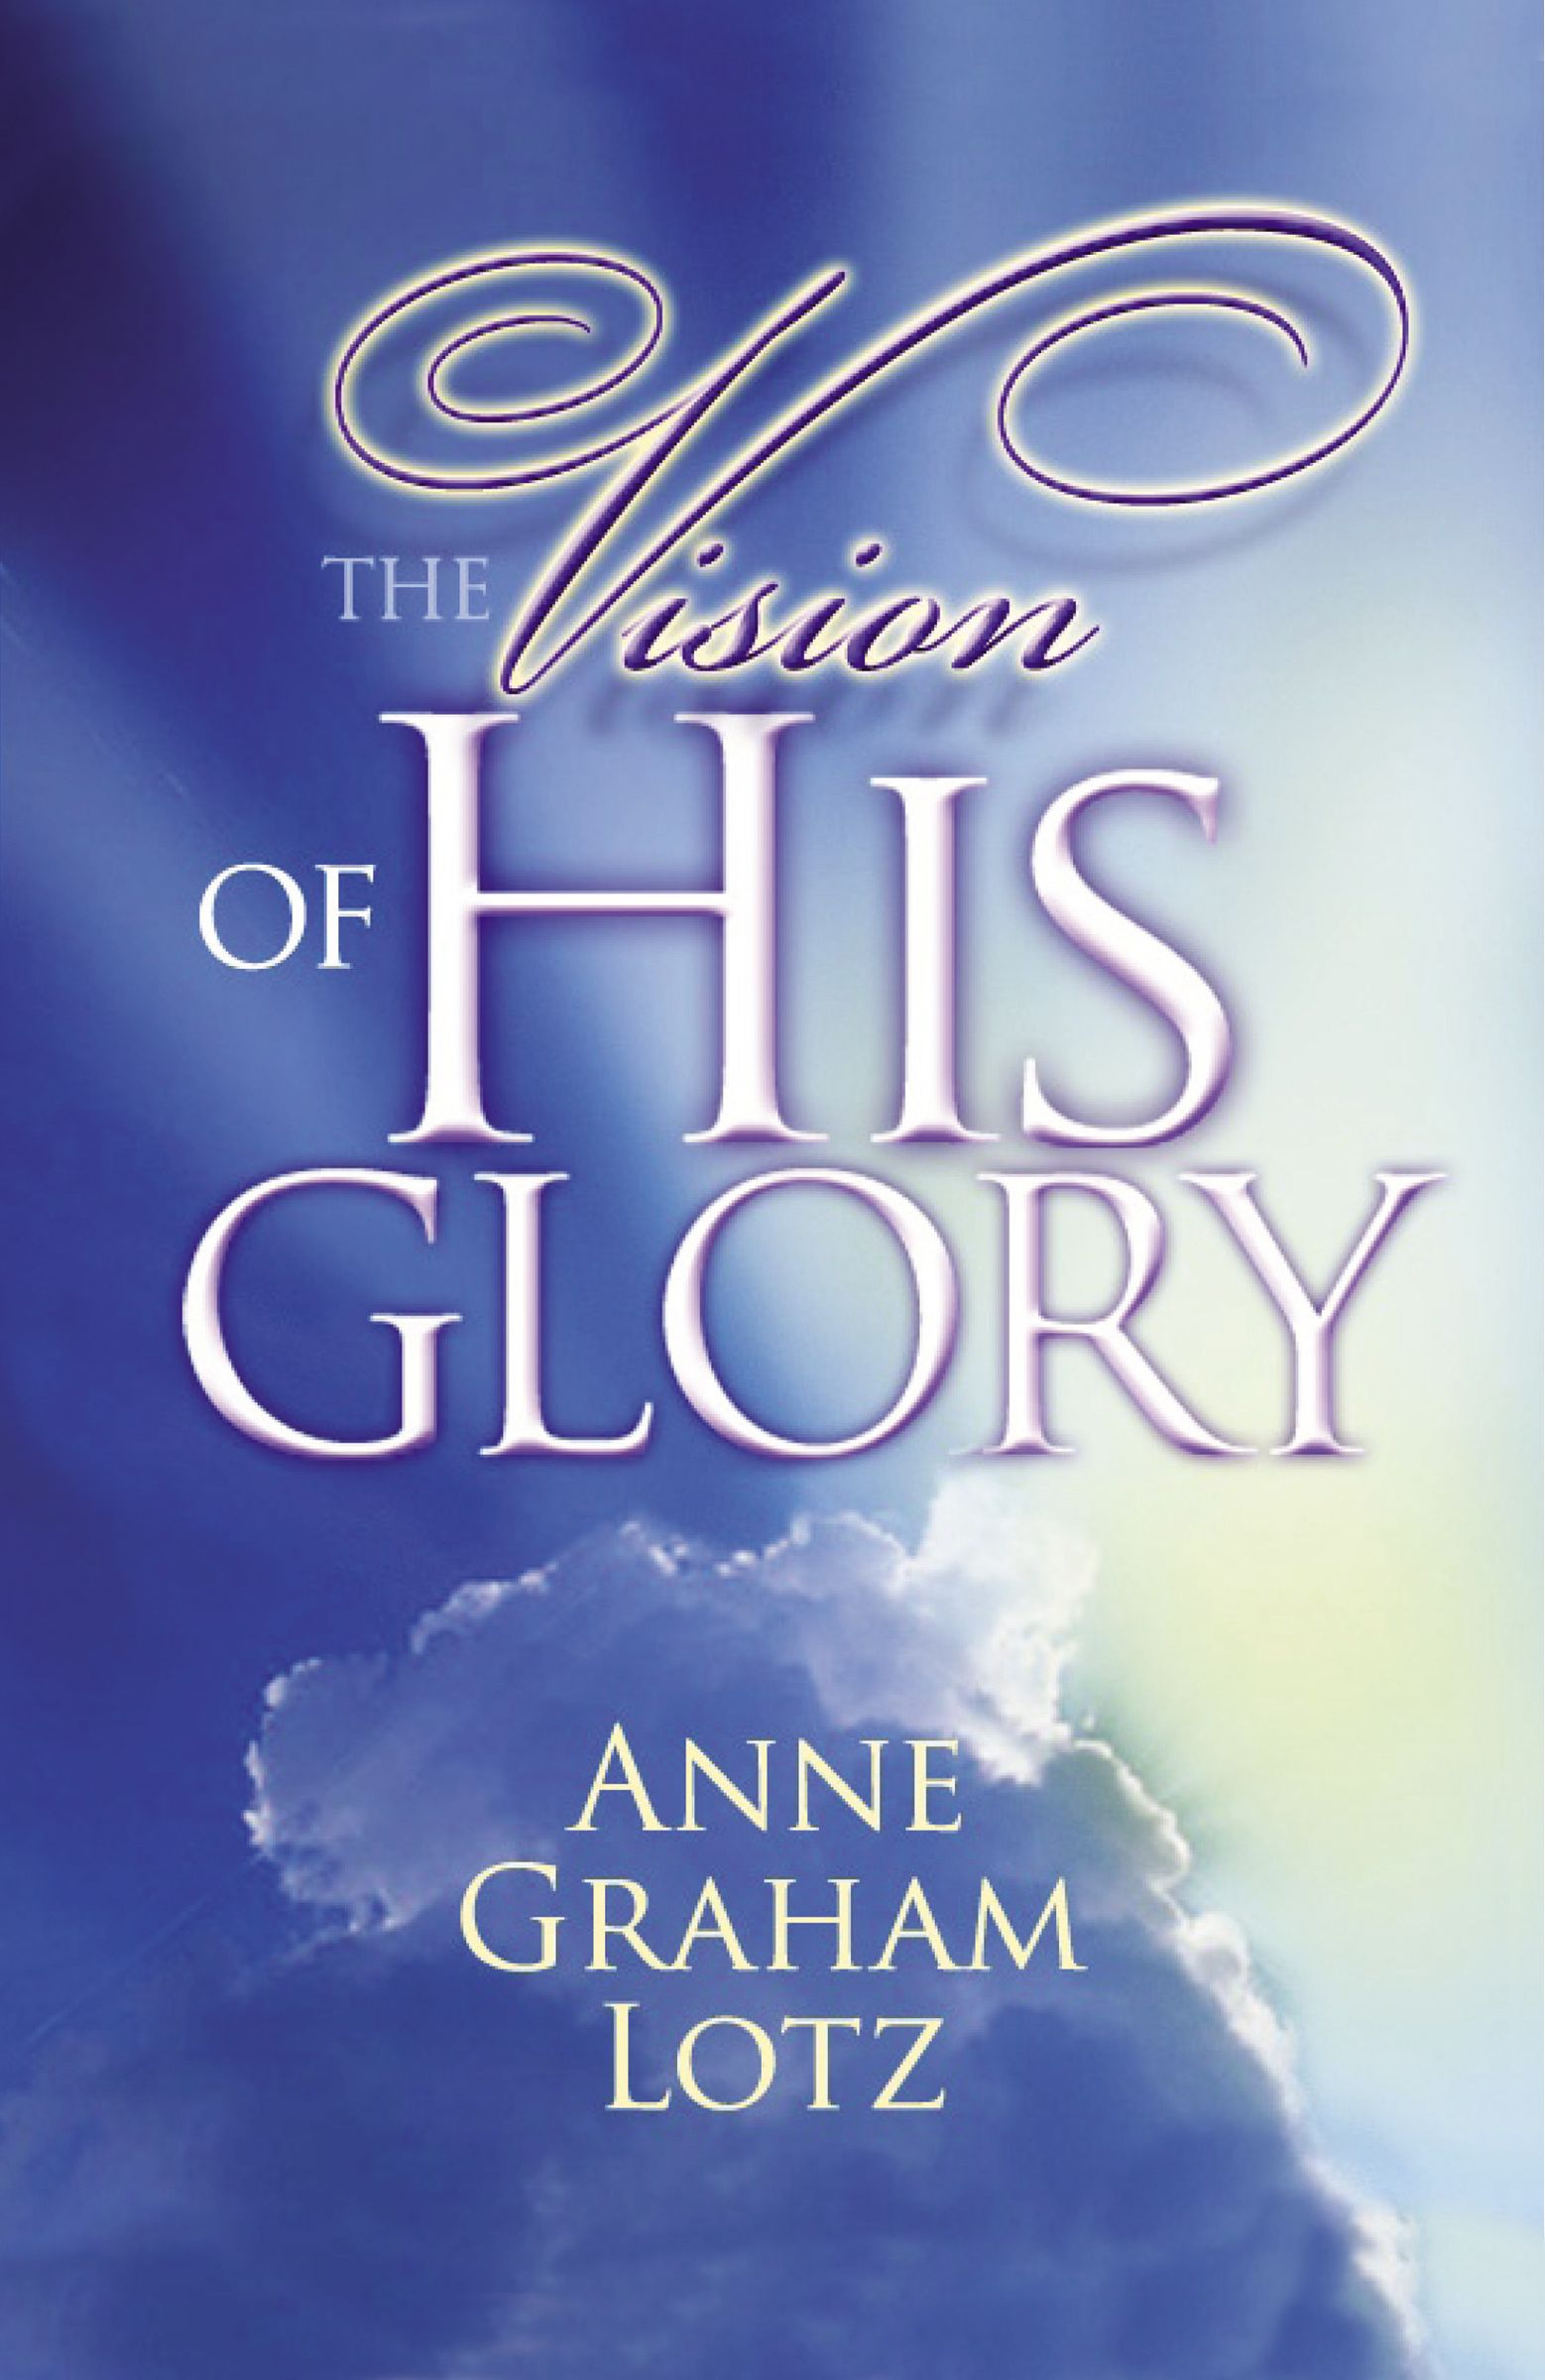 Image of The Vision of His Glory other